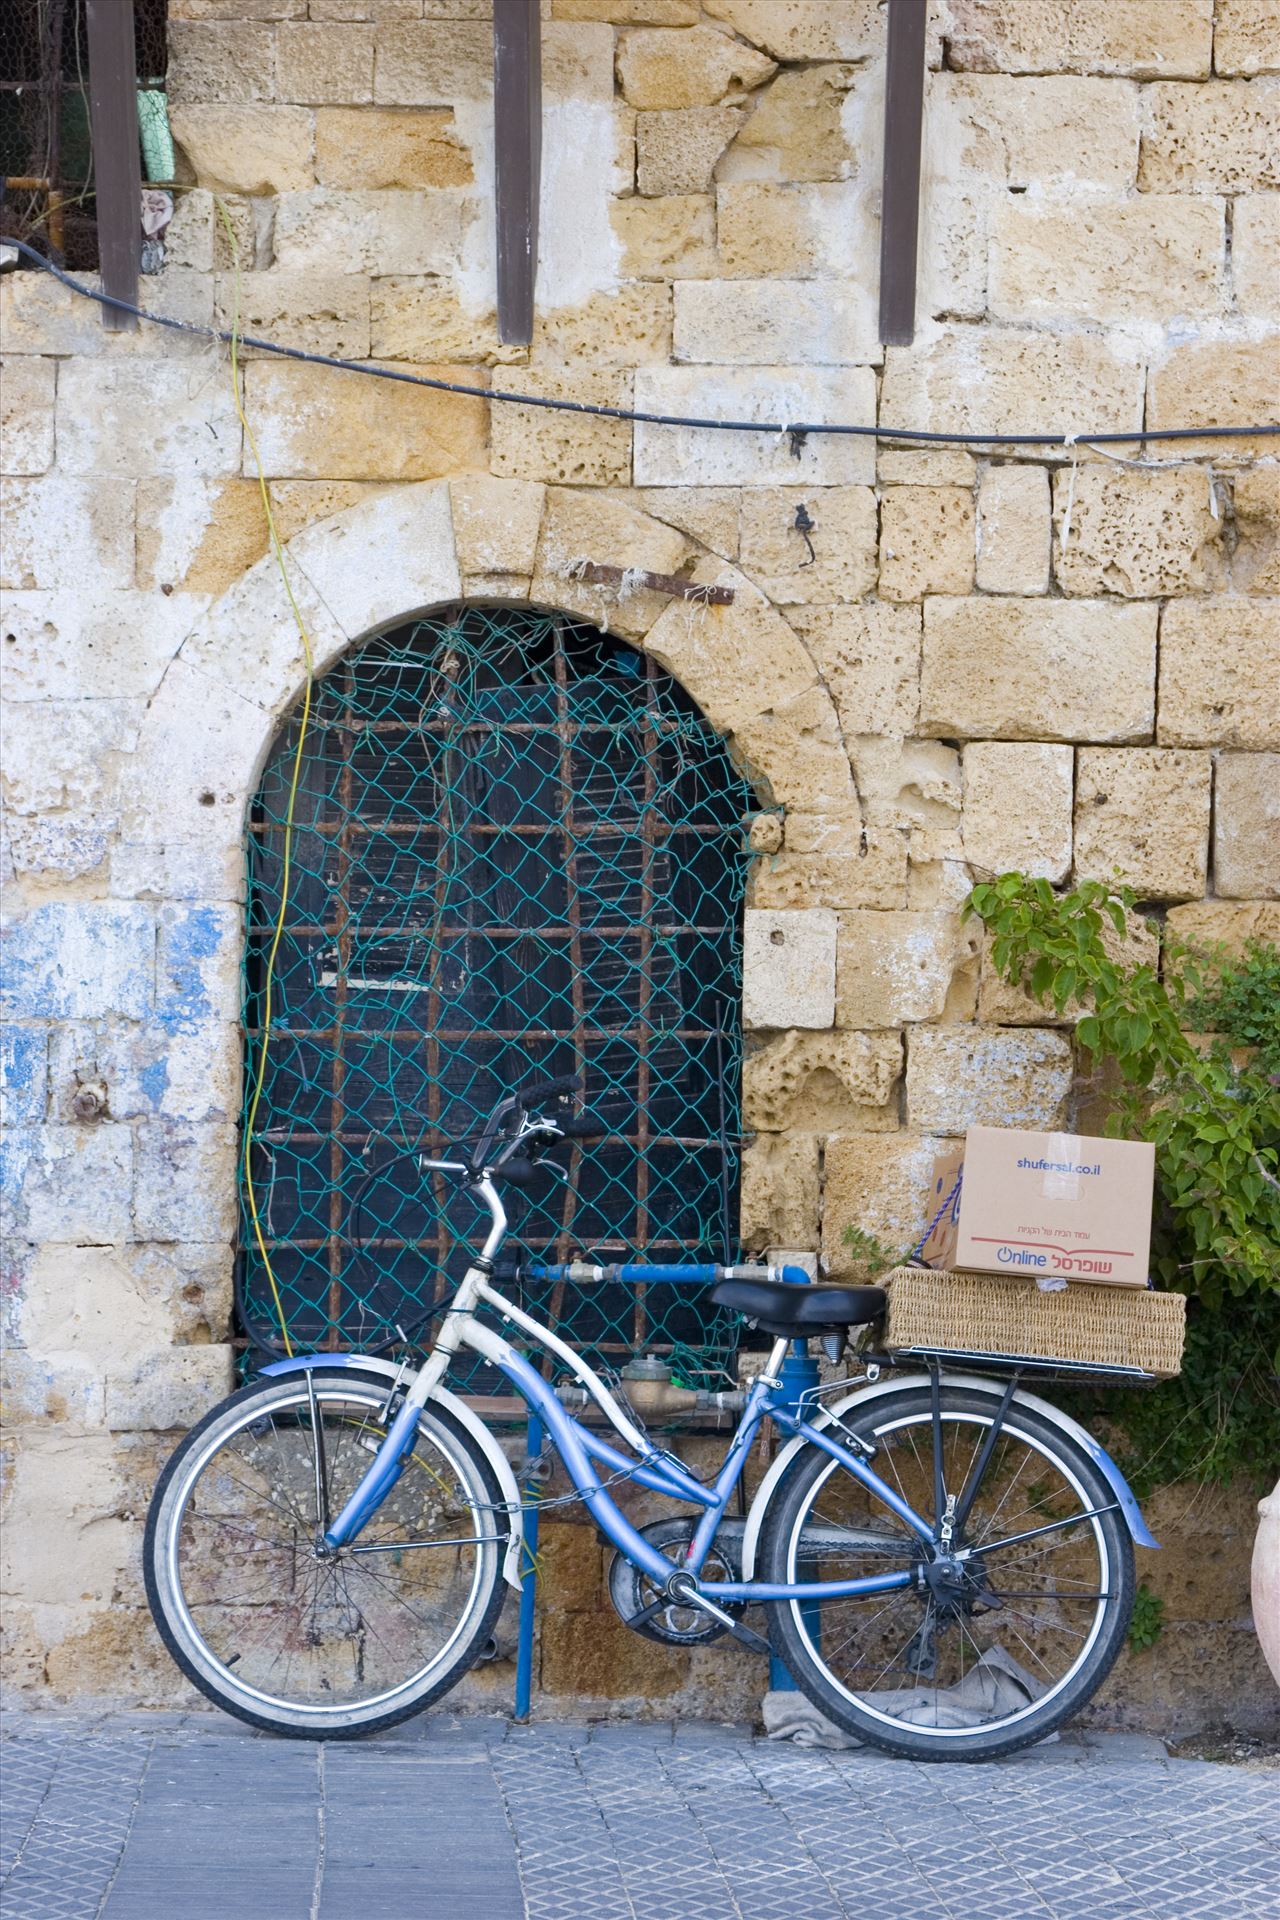 Solo Bike Parking - Bicycle near an old building by Inna Ricardo-Lax Photography